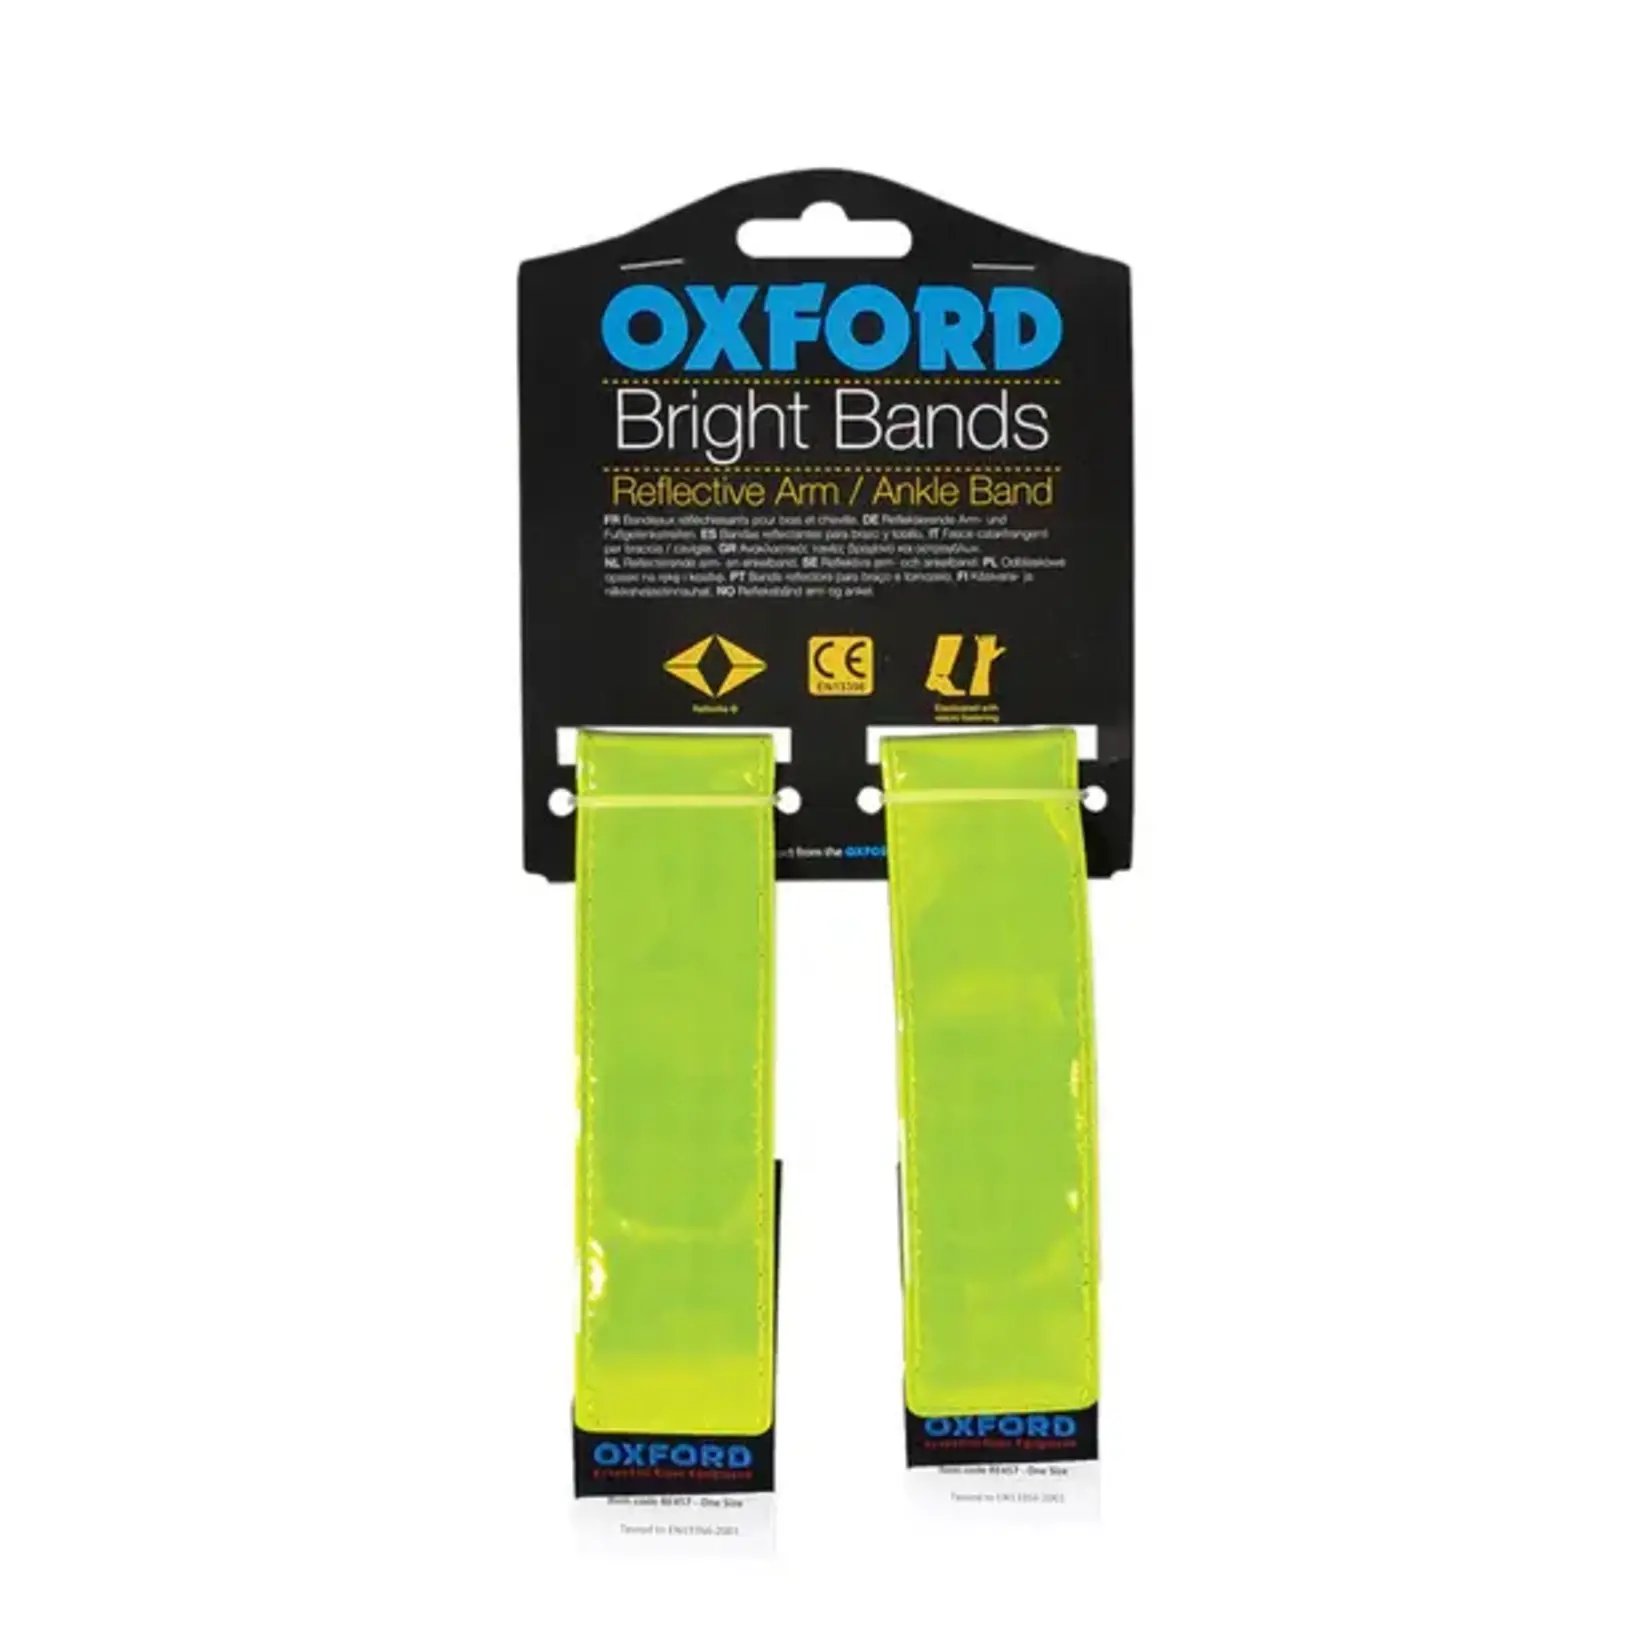 Oxford Oxford Bright Bands Reflective Arm/Ankle Bands